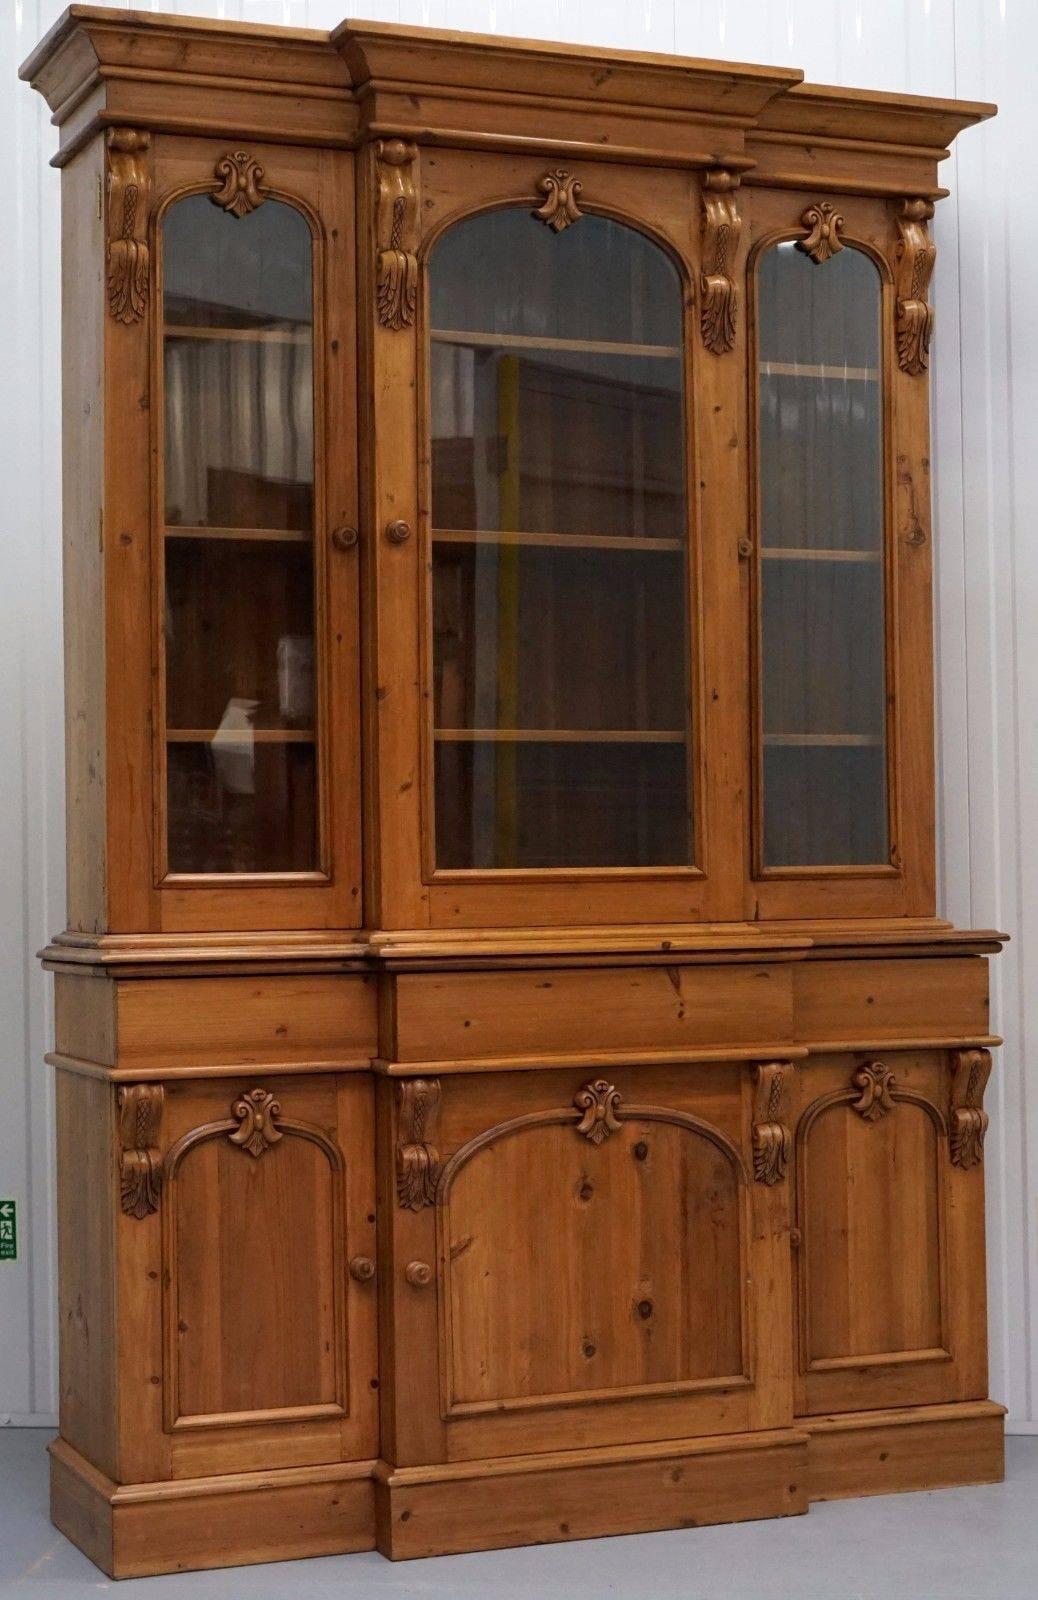 Wimbledon Furniture

We are delighted to offer for sale this lovely hand carved solid pine vintage breakfront Library bookcase cabinet

Please note the delivery fee listed is just a guide, for an accurate quote please send me your postcode and I’ll